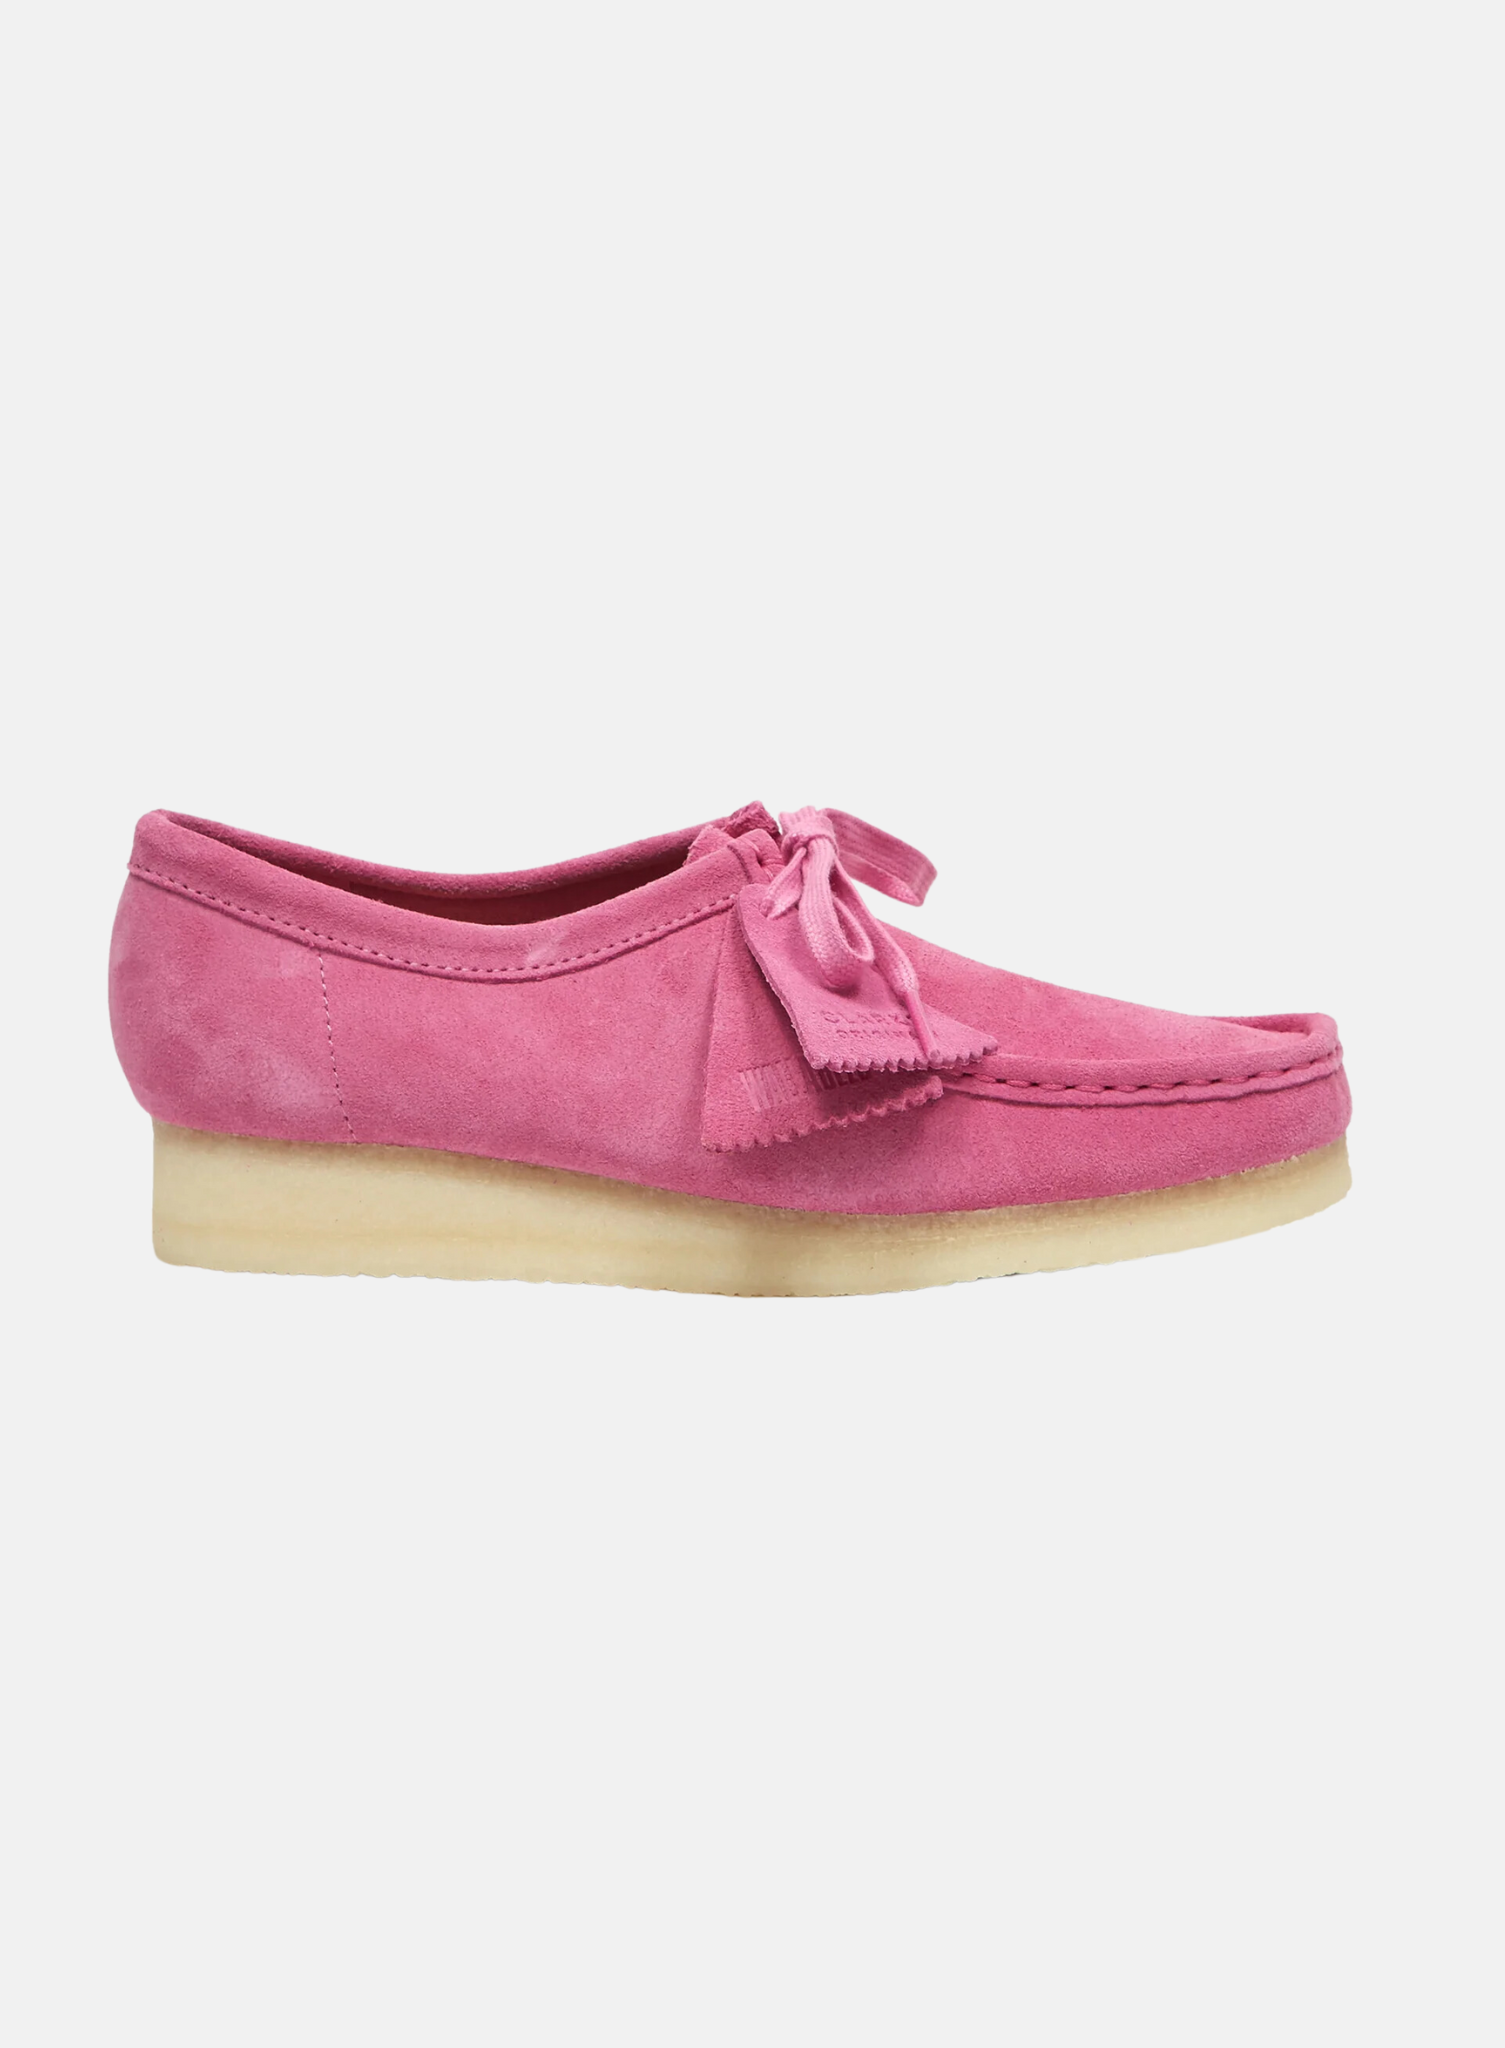 Wallabee Suede Pink